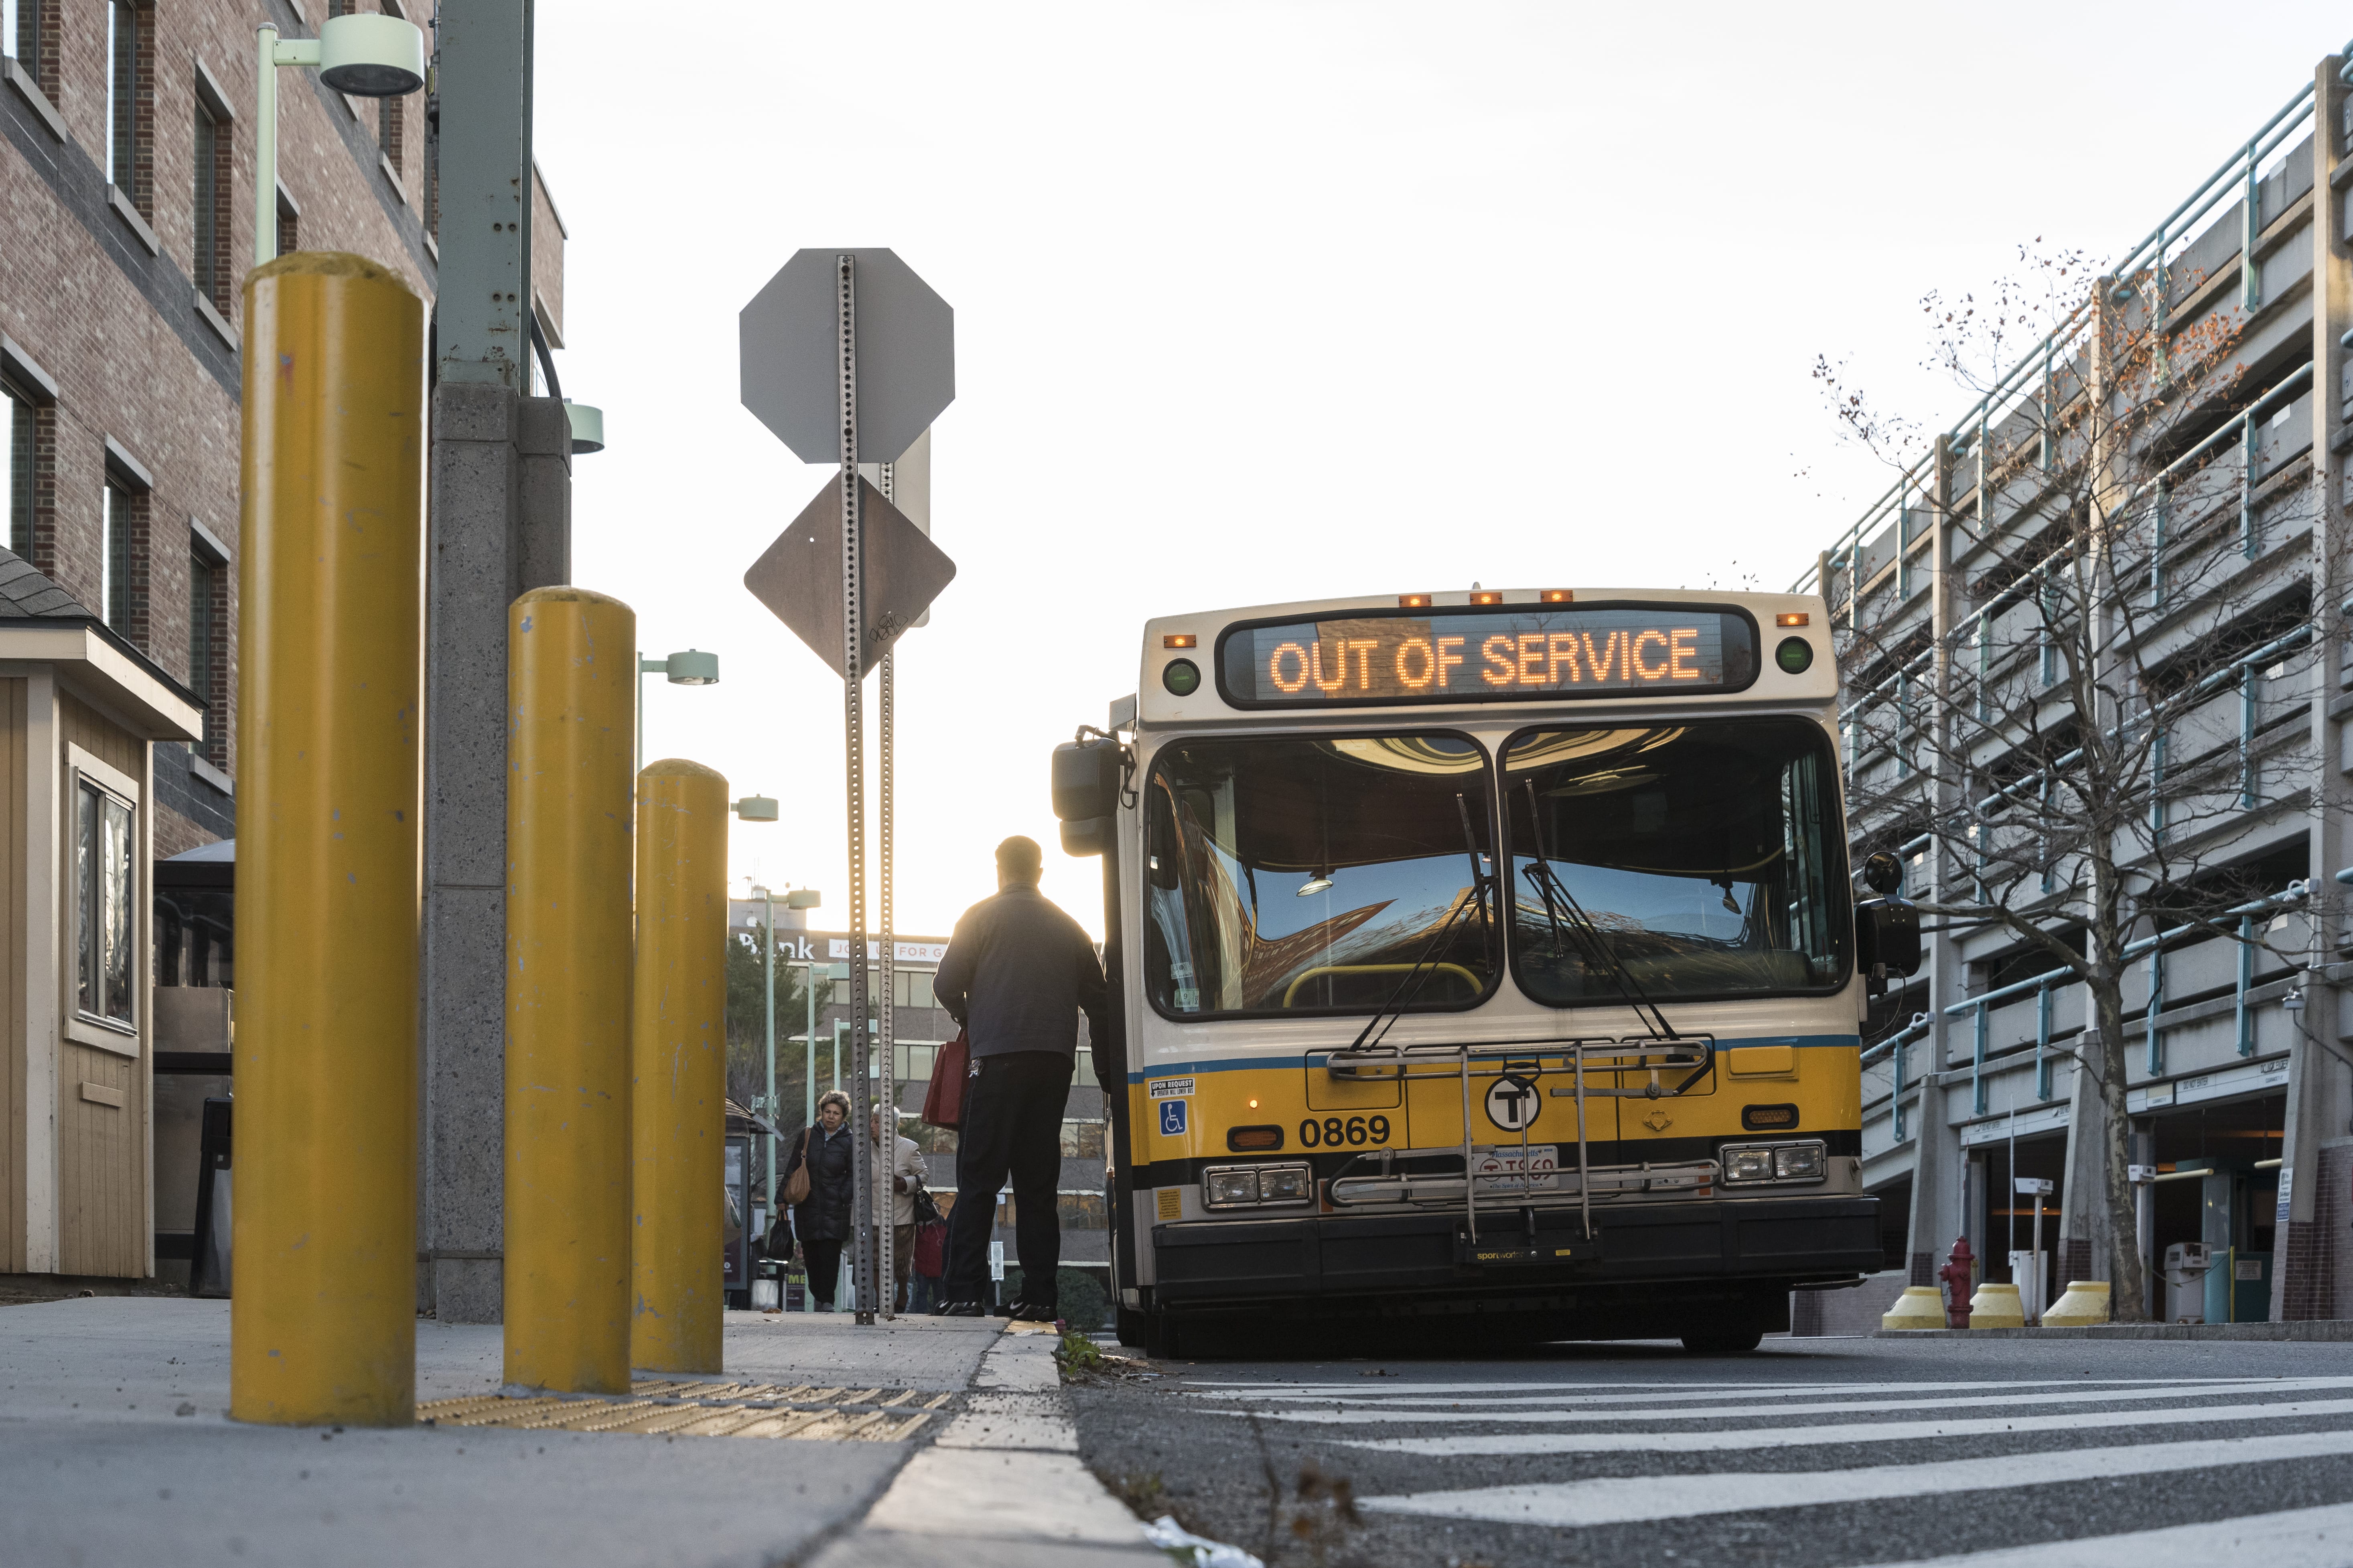 A bus driver climbs out of his bus at Central Square Station in Lynn.